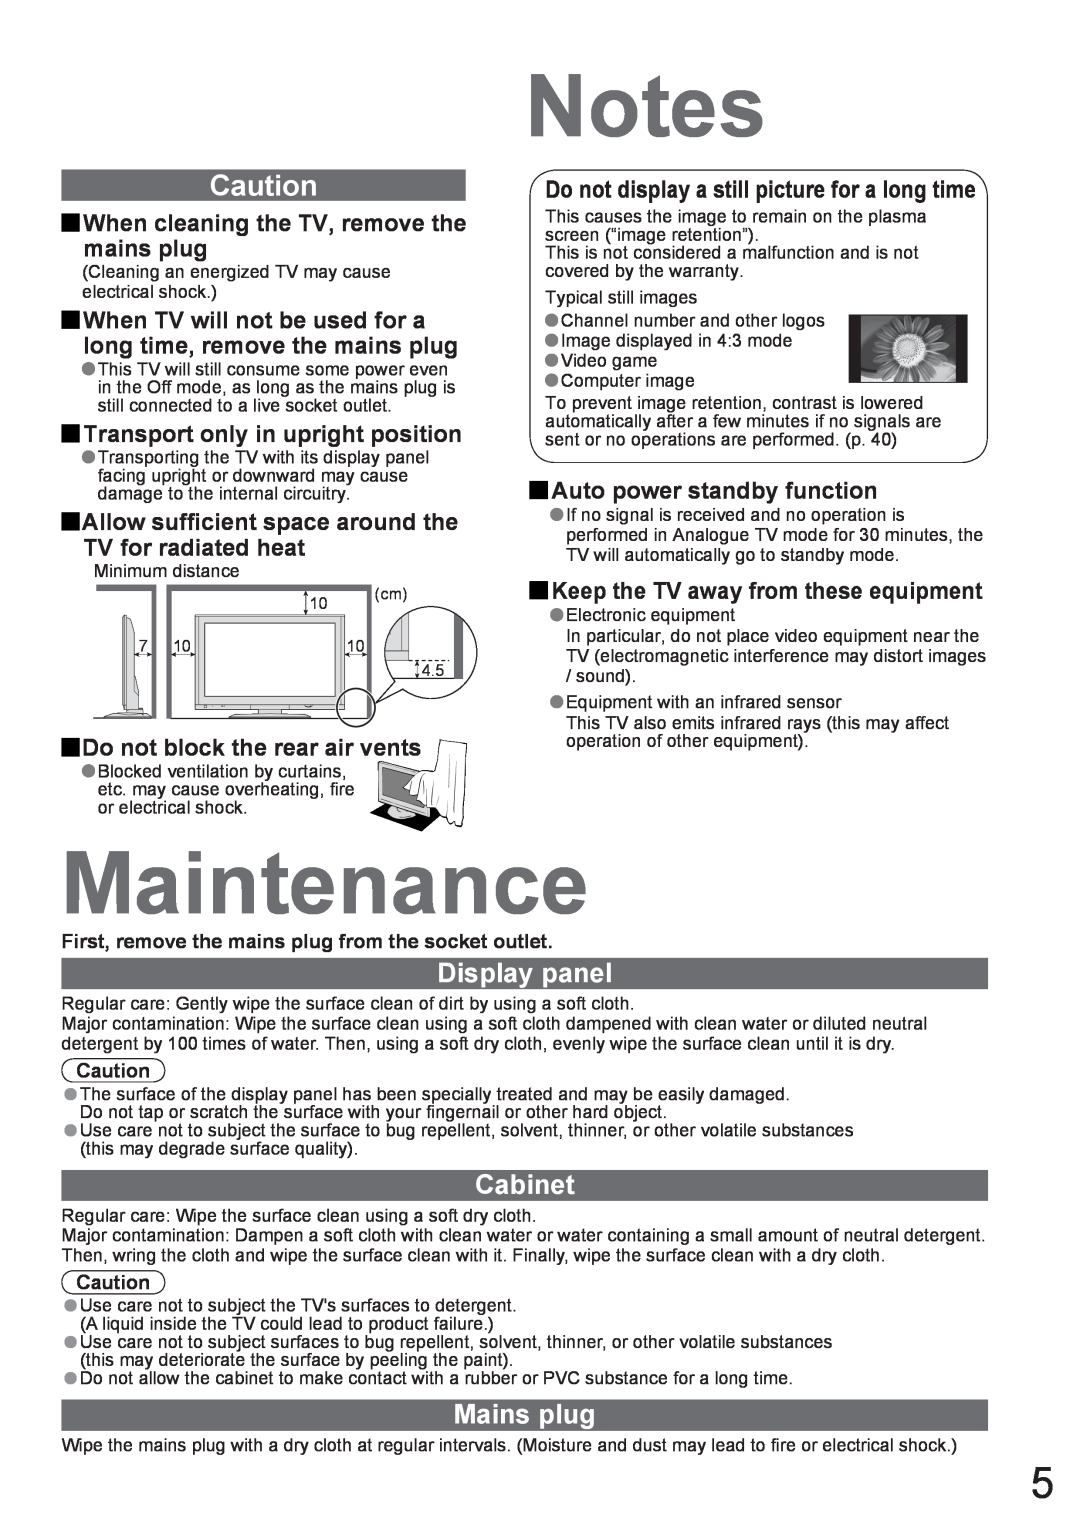 Panasonic TH-42PZ700A Maintenance, Display panel, Cabinet, Mains plug, When cleaning the TV, remove the mains plug 